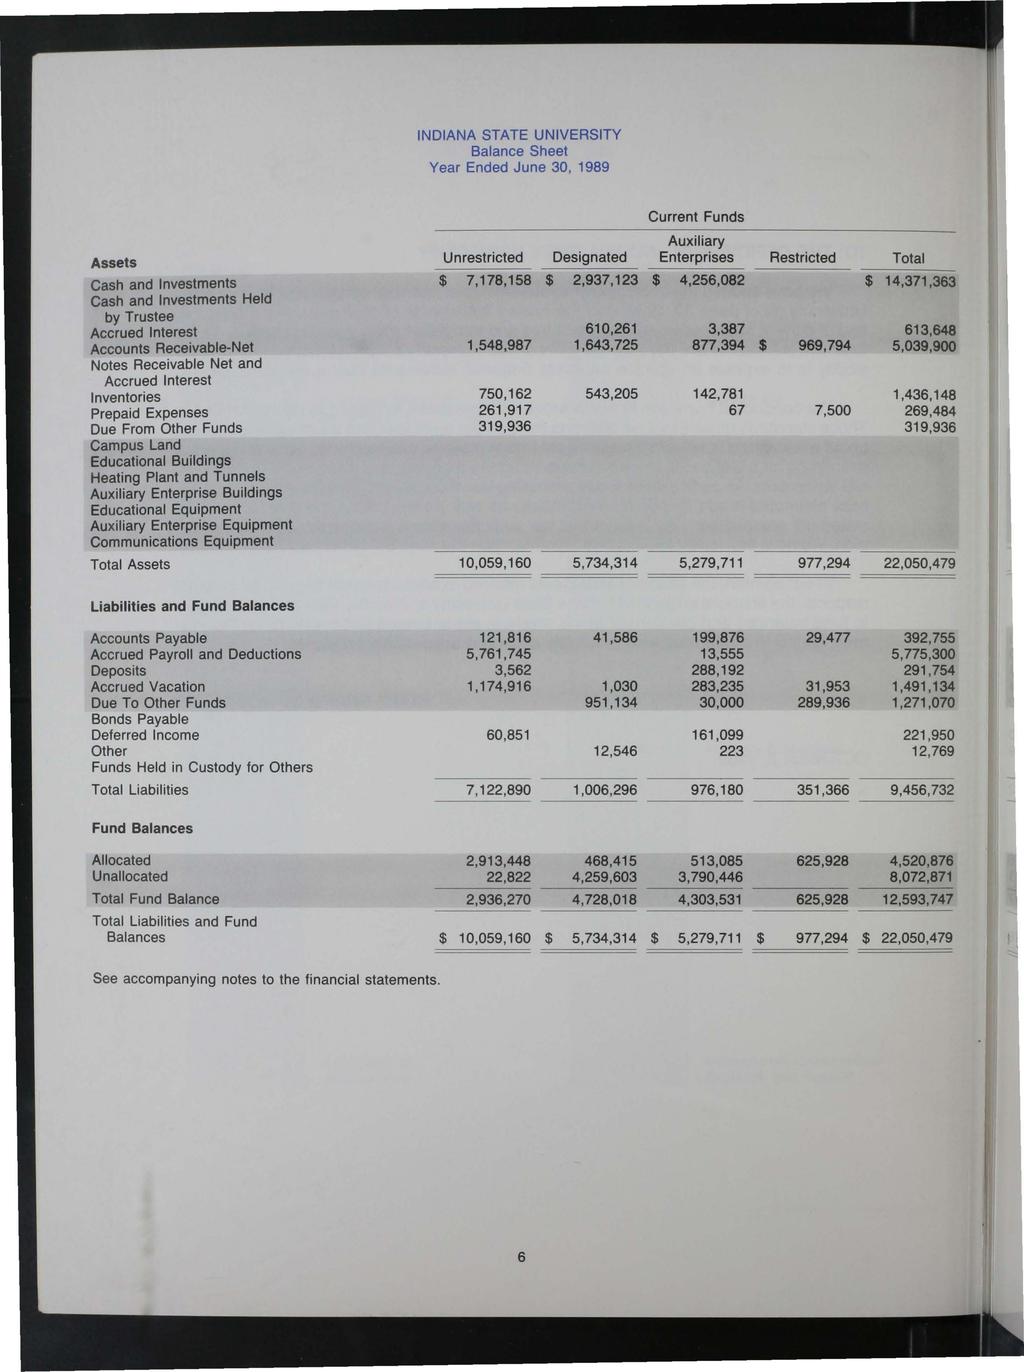 INDIANA STATE UNIVERSITY Balance Sheet Year Ended June 30, 1989 Current Funds Auxiliary Assets Unrestricted Designated Enterprises Restricted Total Cash and Investments $ 7,178,158 $ 2,937,123 $